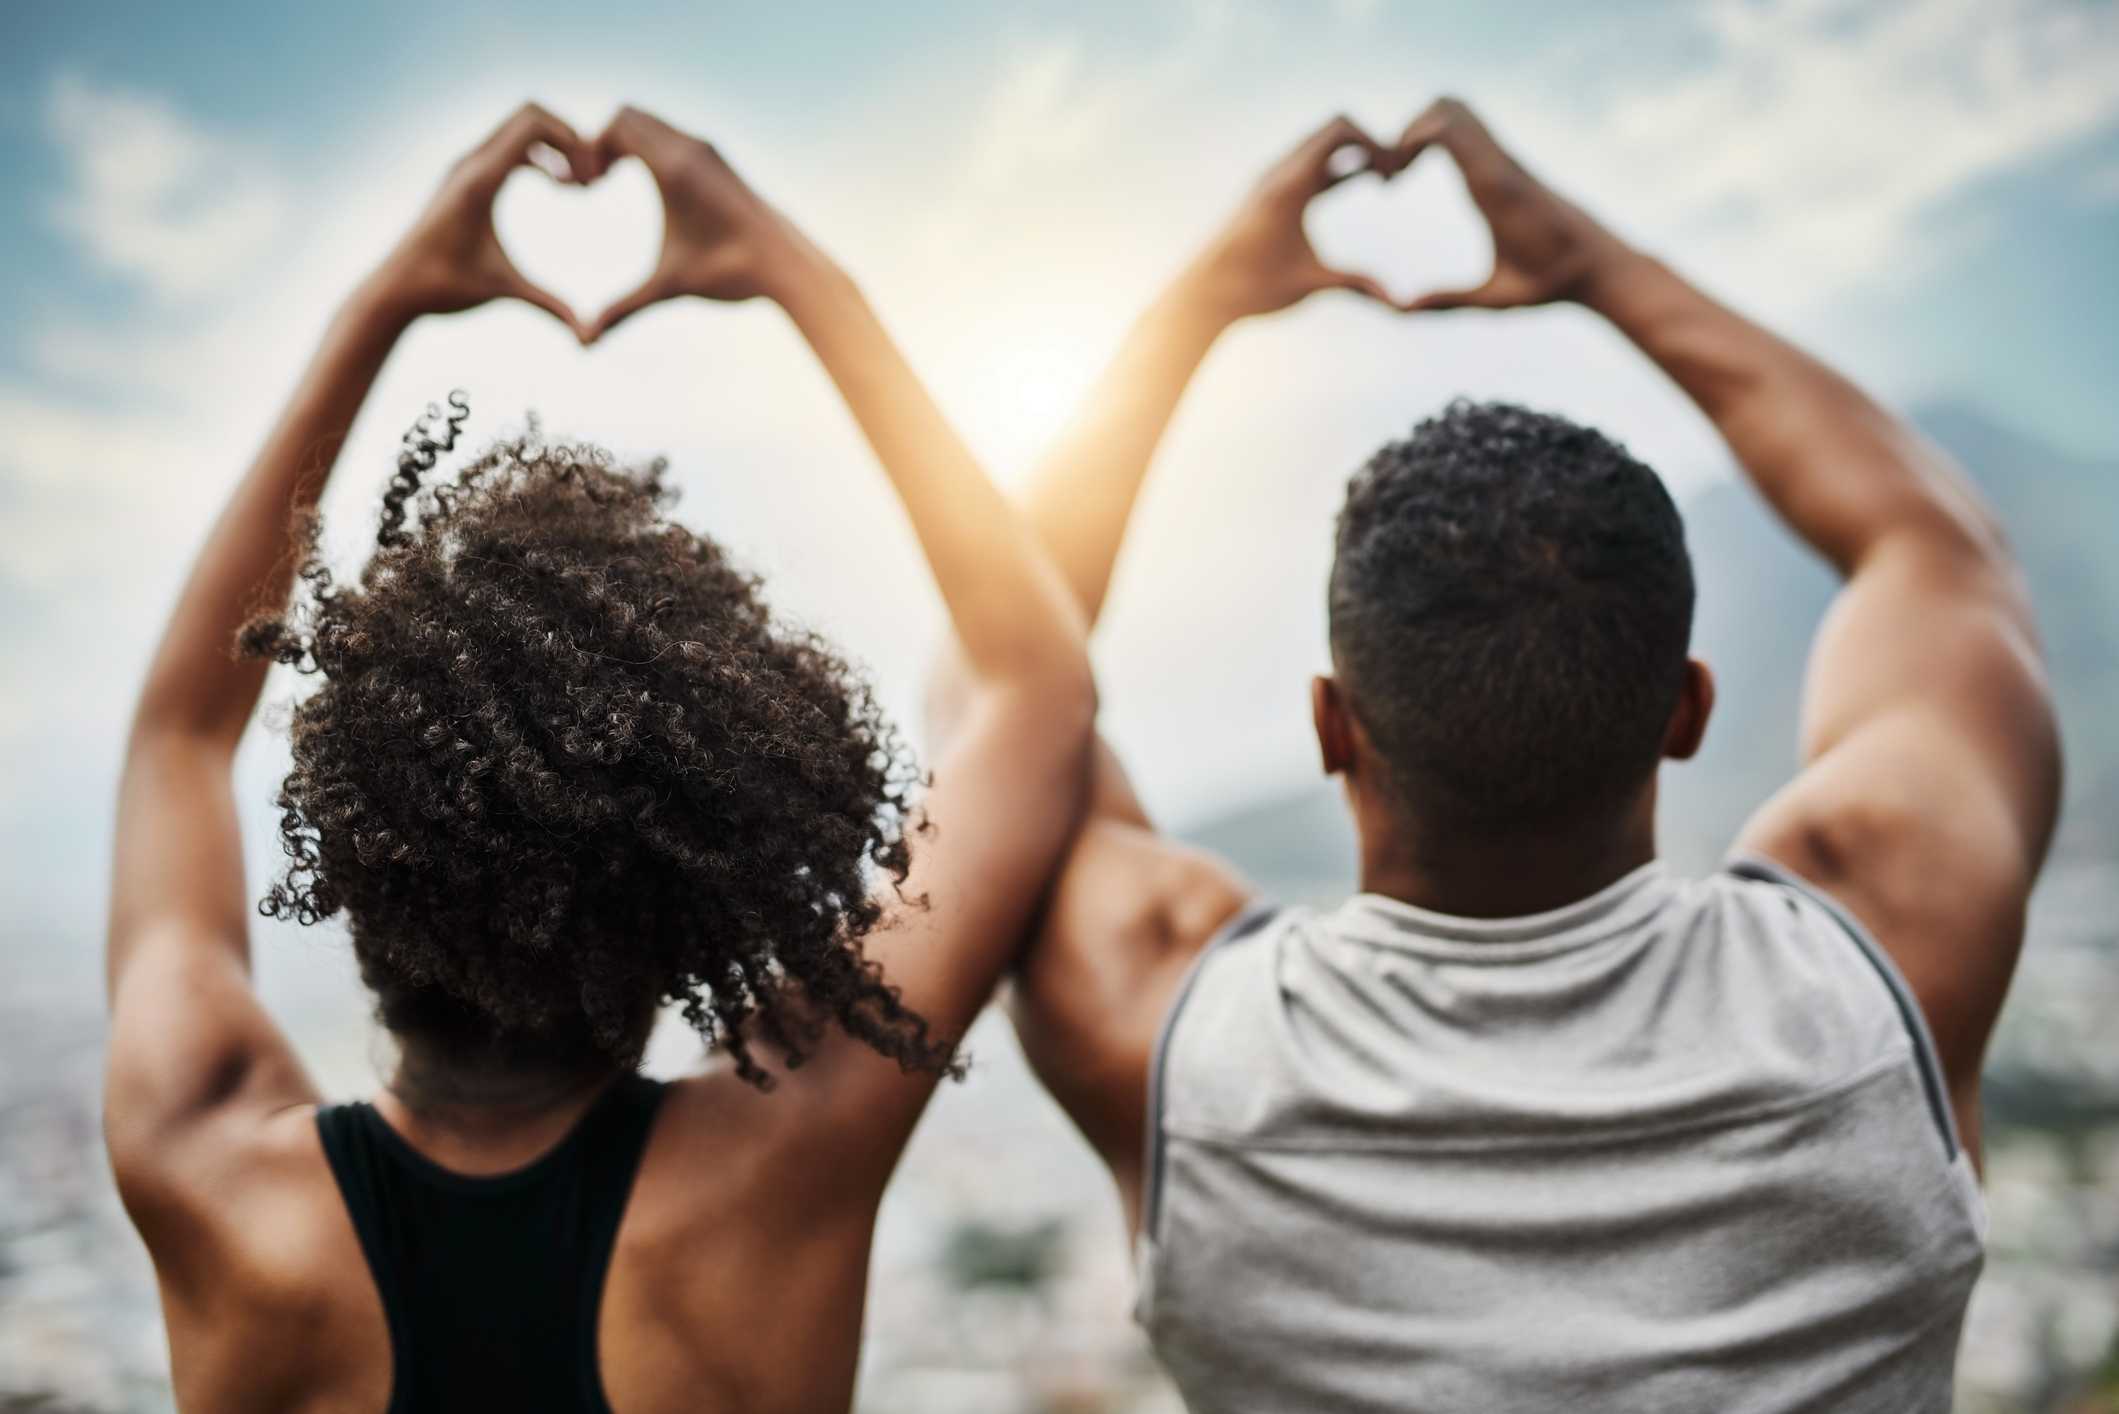 Rearview shot of a sporty young couple making heart shapes with their hands while exercising outdoors